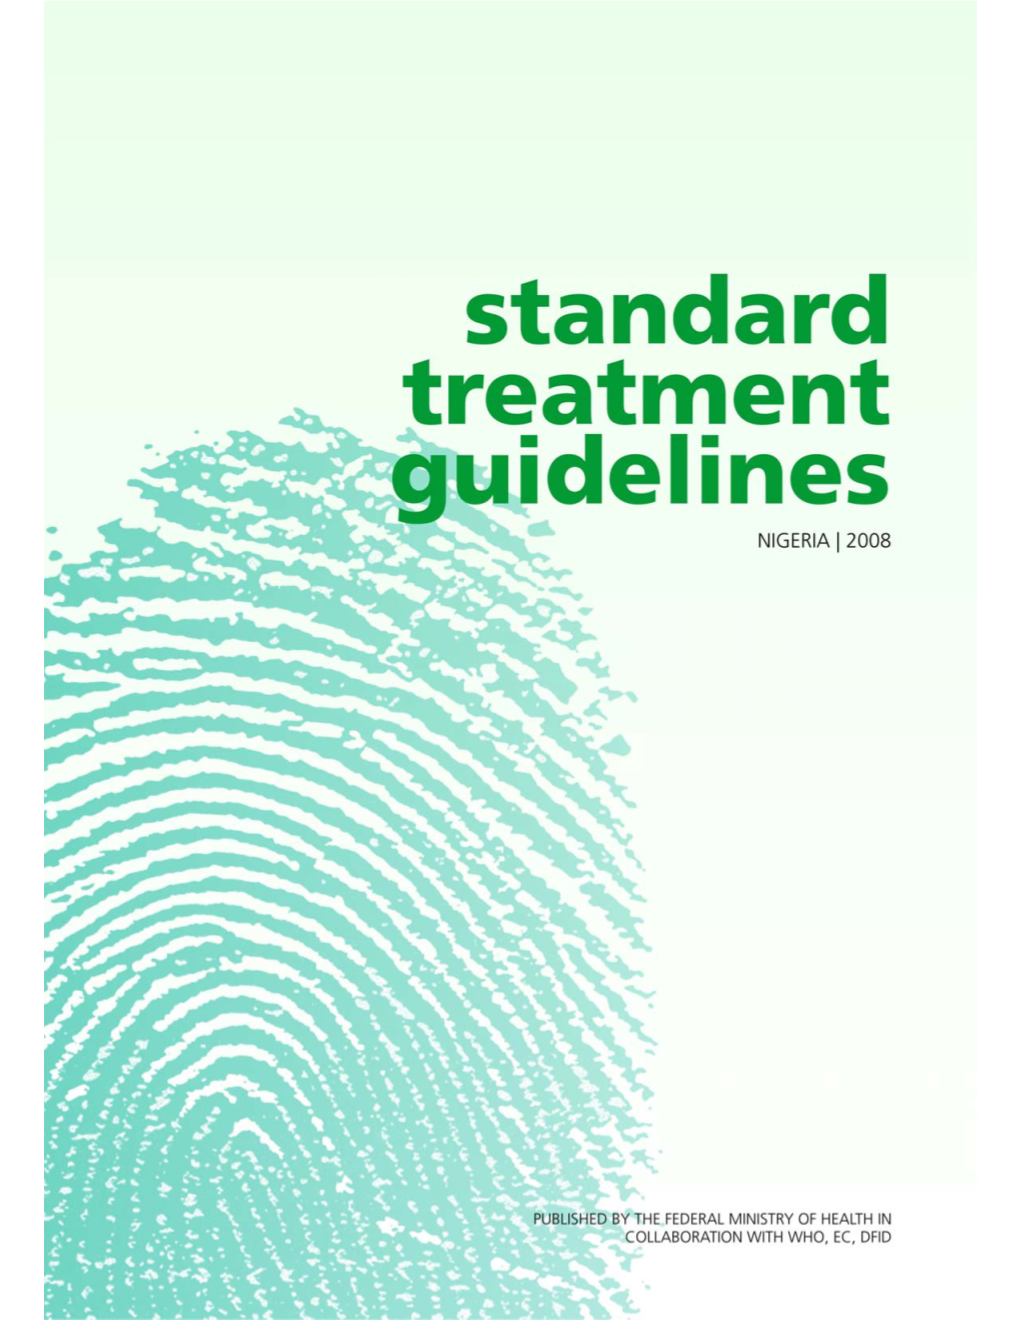 Standard Treatment Guidelines for Nigeria 2008